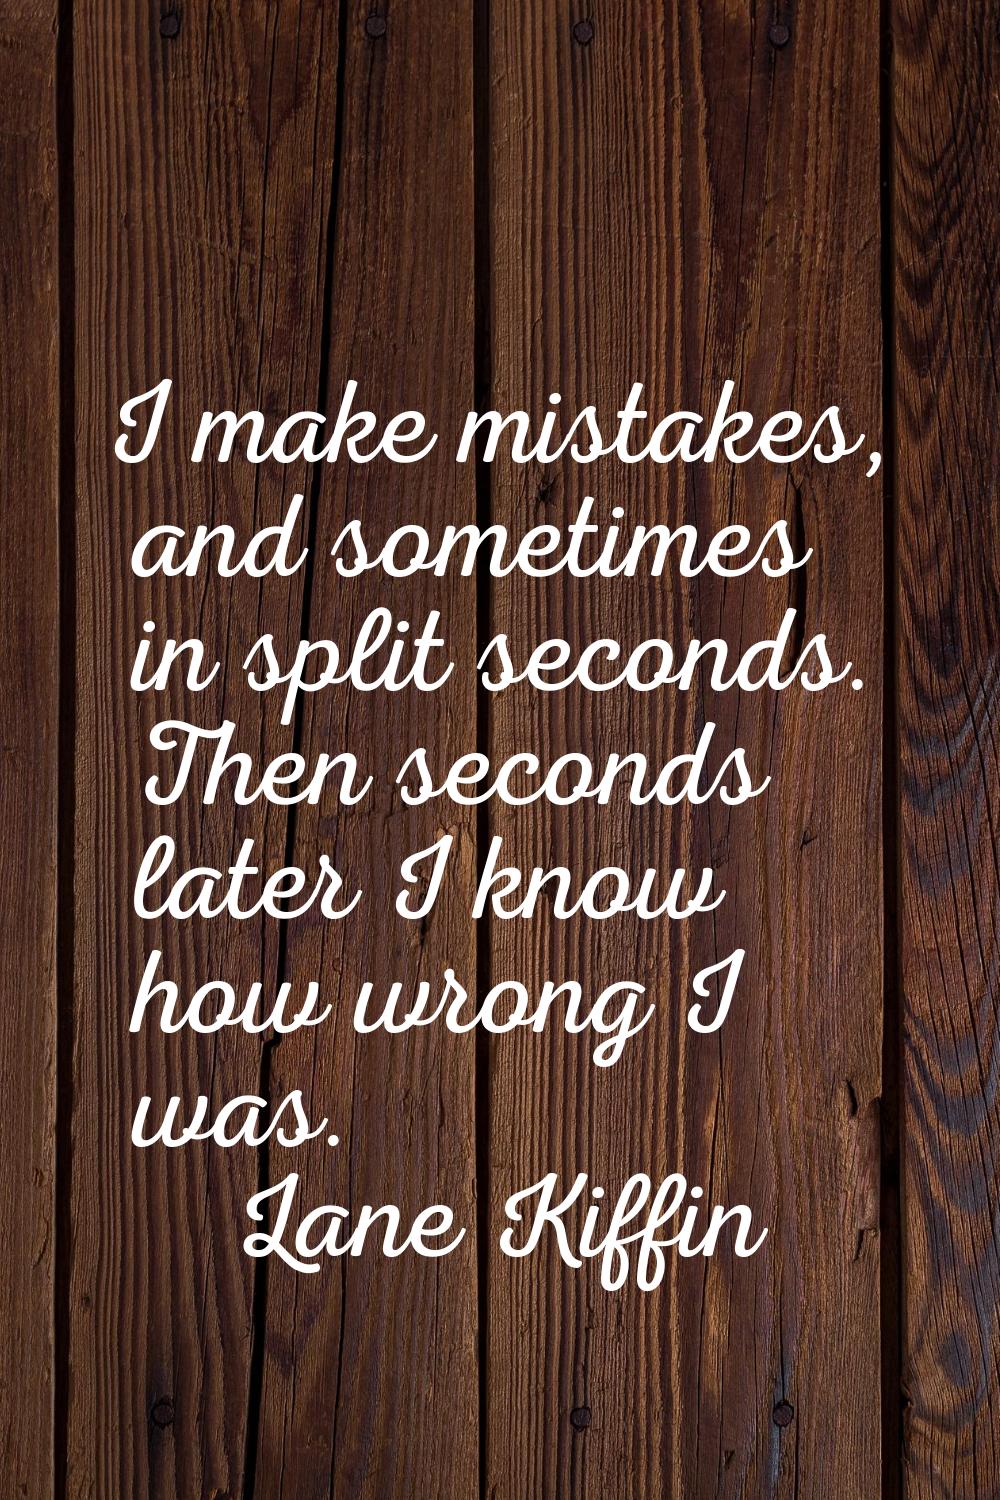 I make mistakes, and sometimes in split seconds. Then seconds later I know how wrong I was.